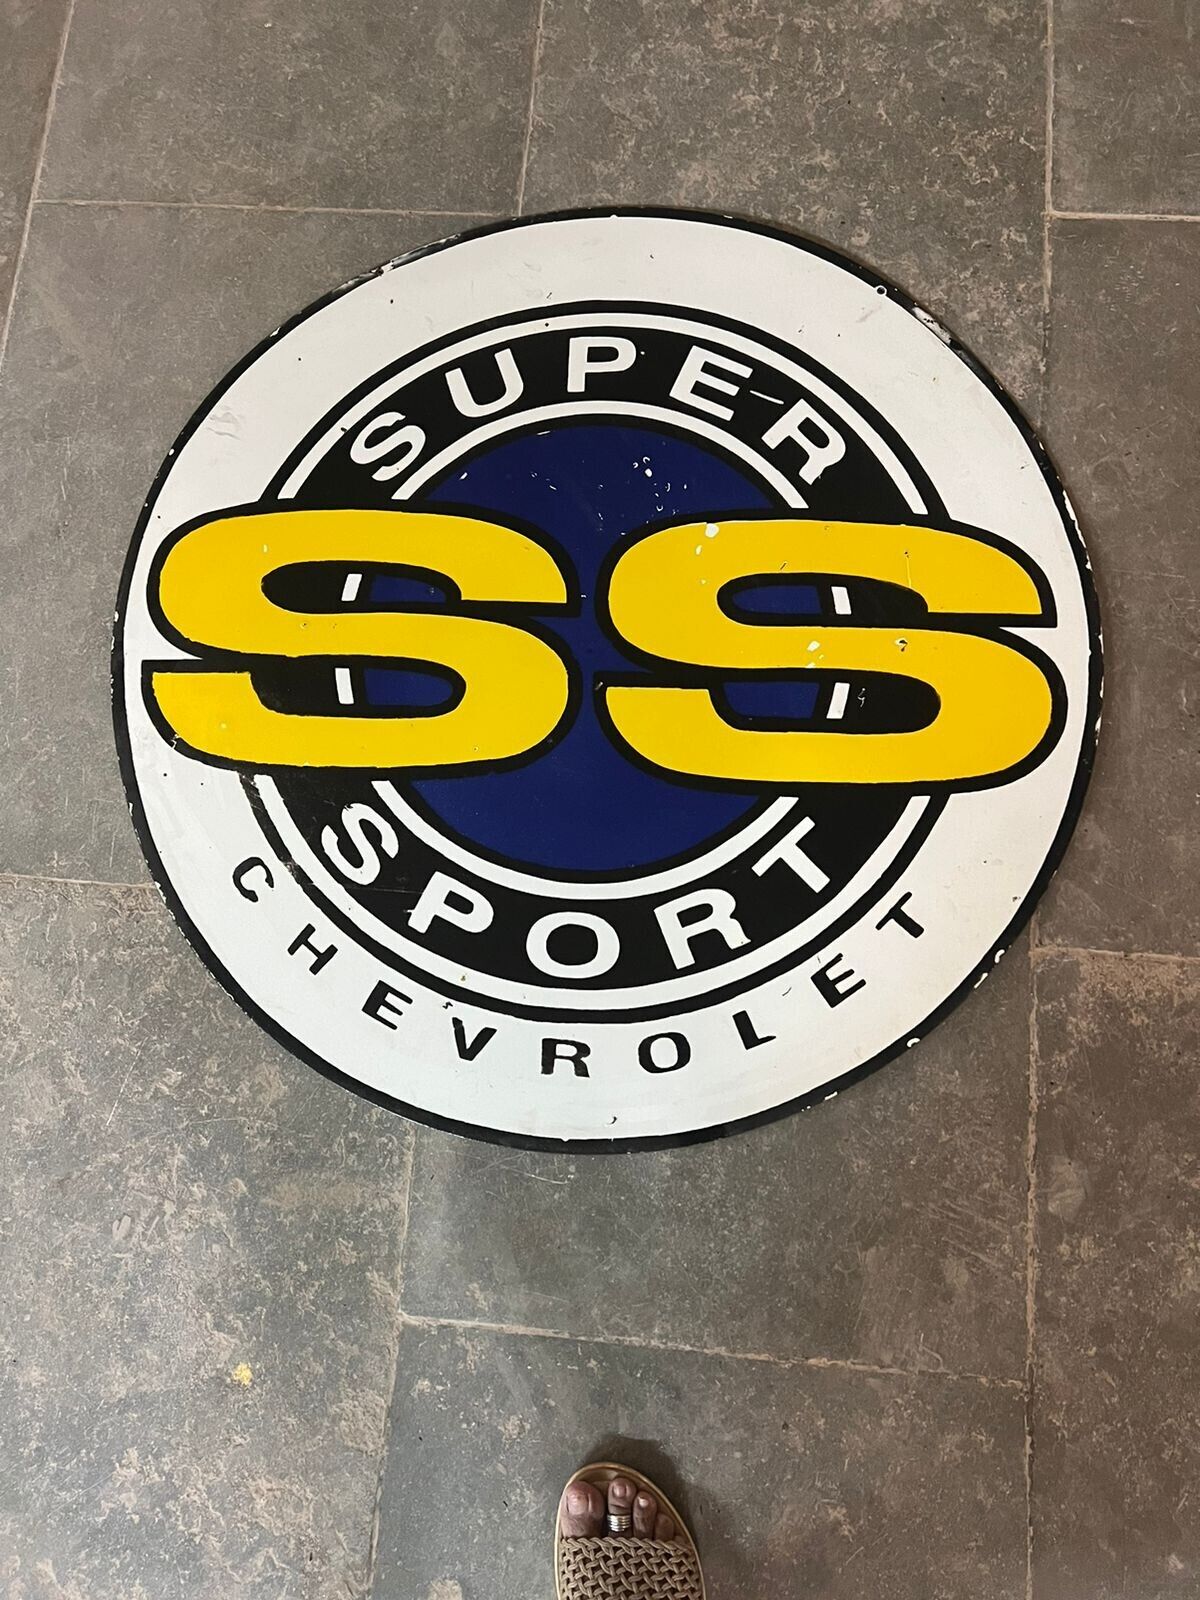 RARE PORCELAIN SUPER CHEVROLET  ENAMEL SIGN 36X36 INCHES DOUBLE SIDED